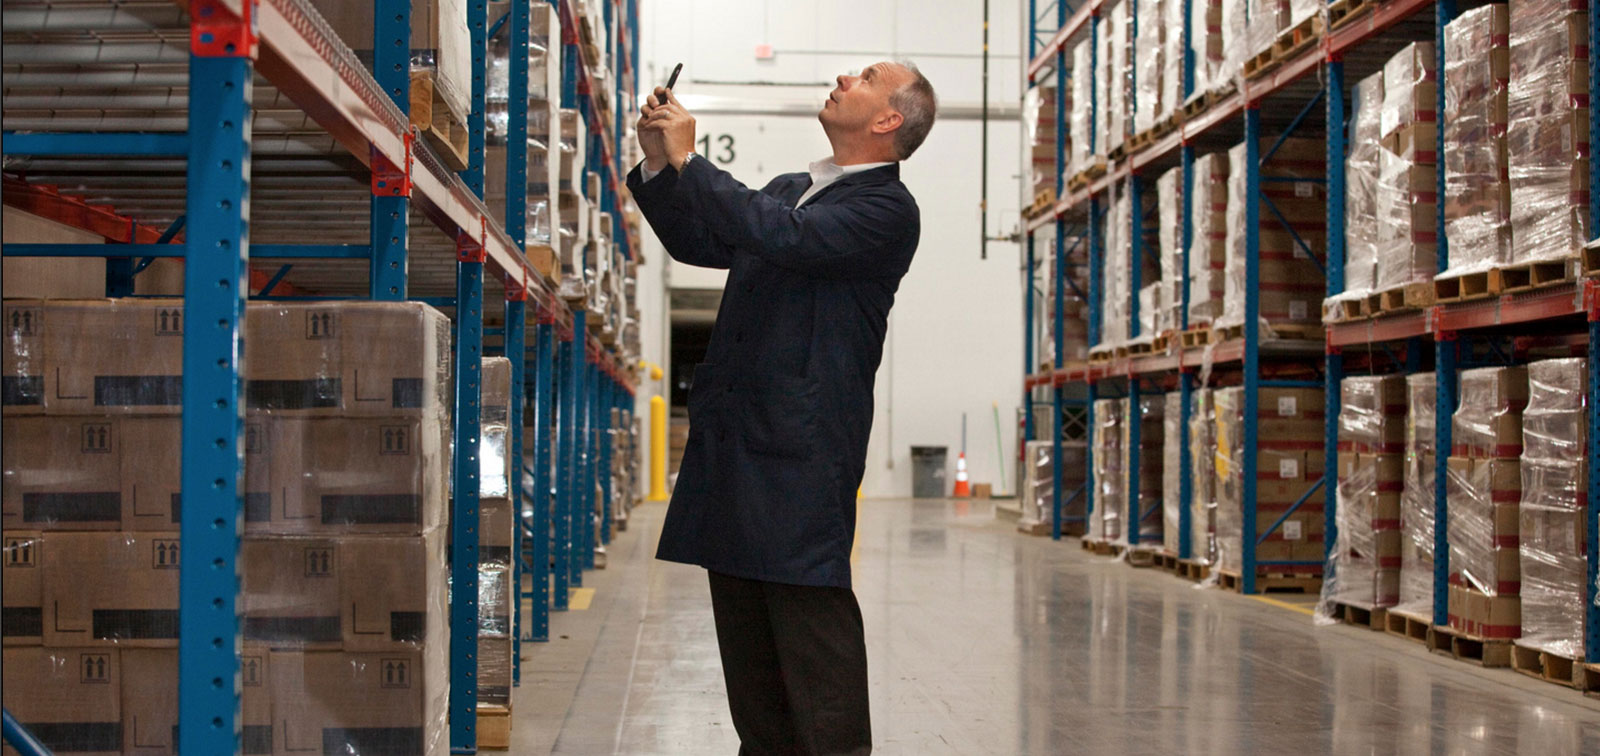 Business man taking picture in a warehouse